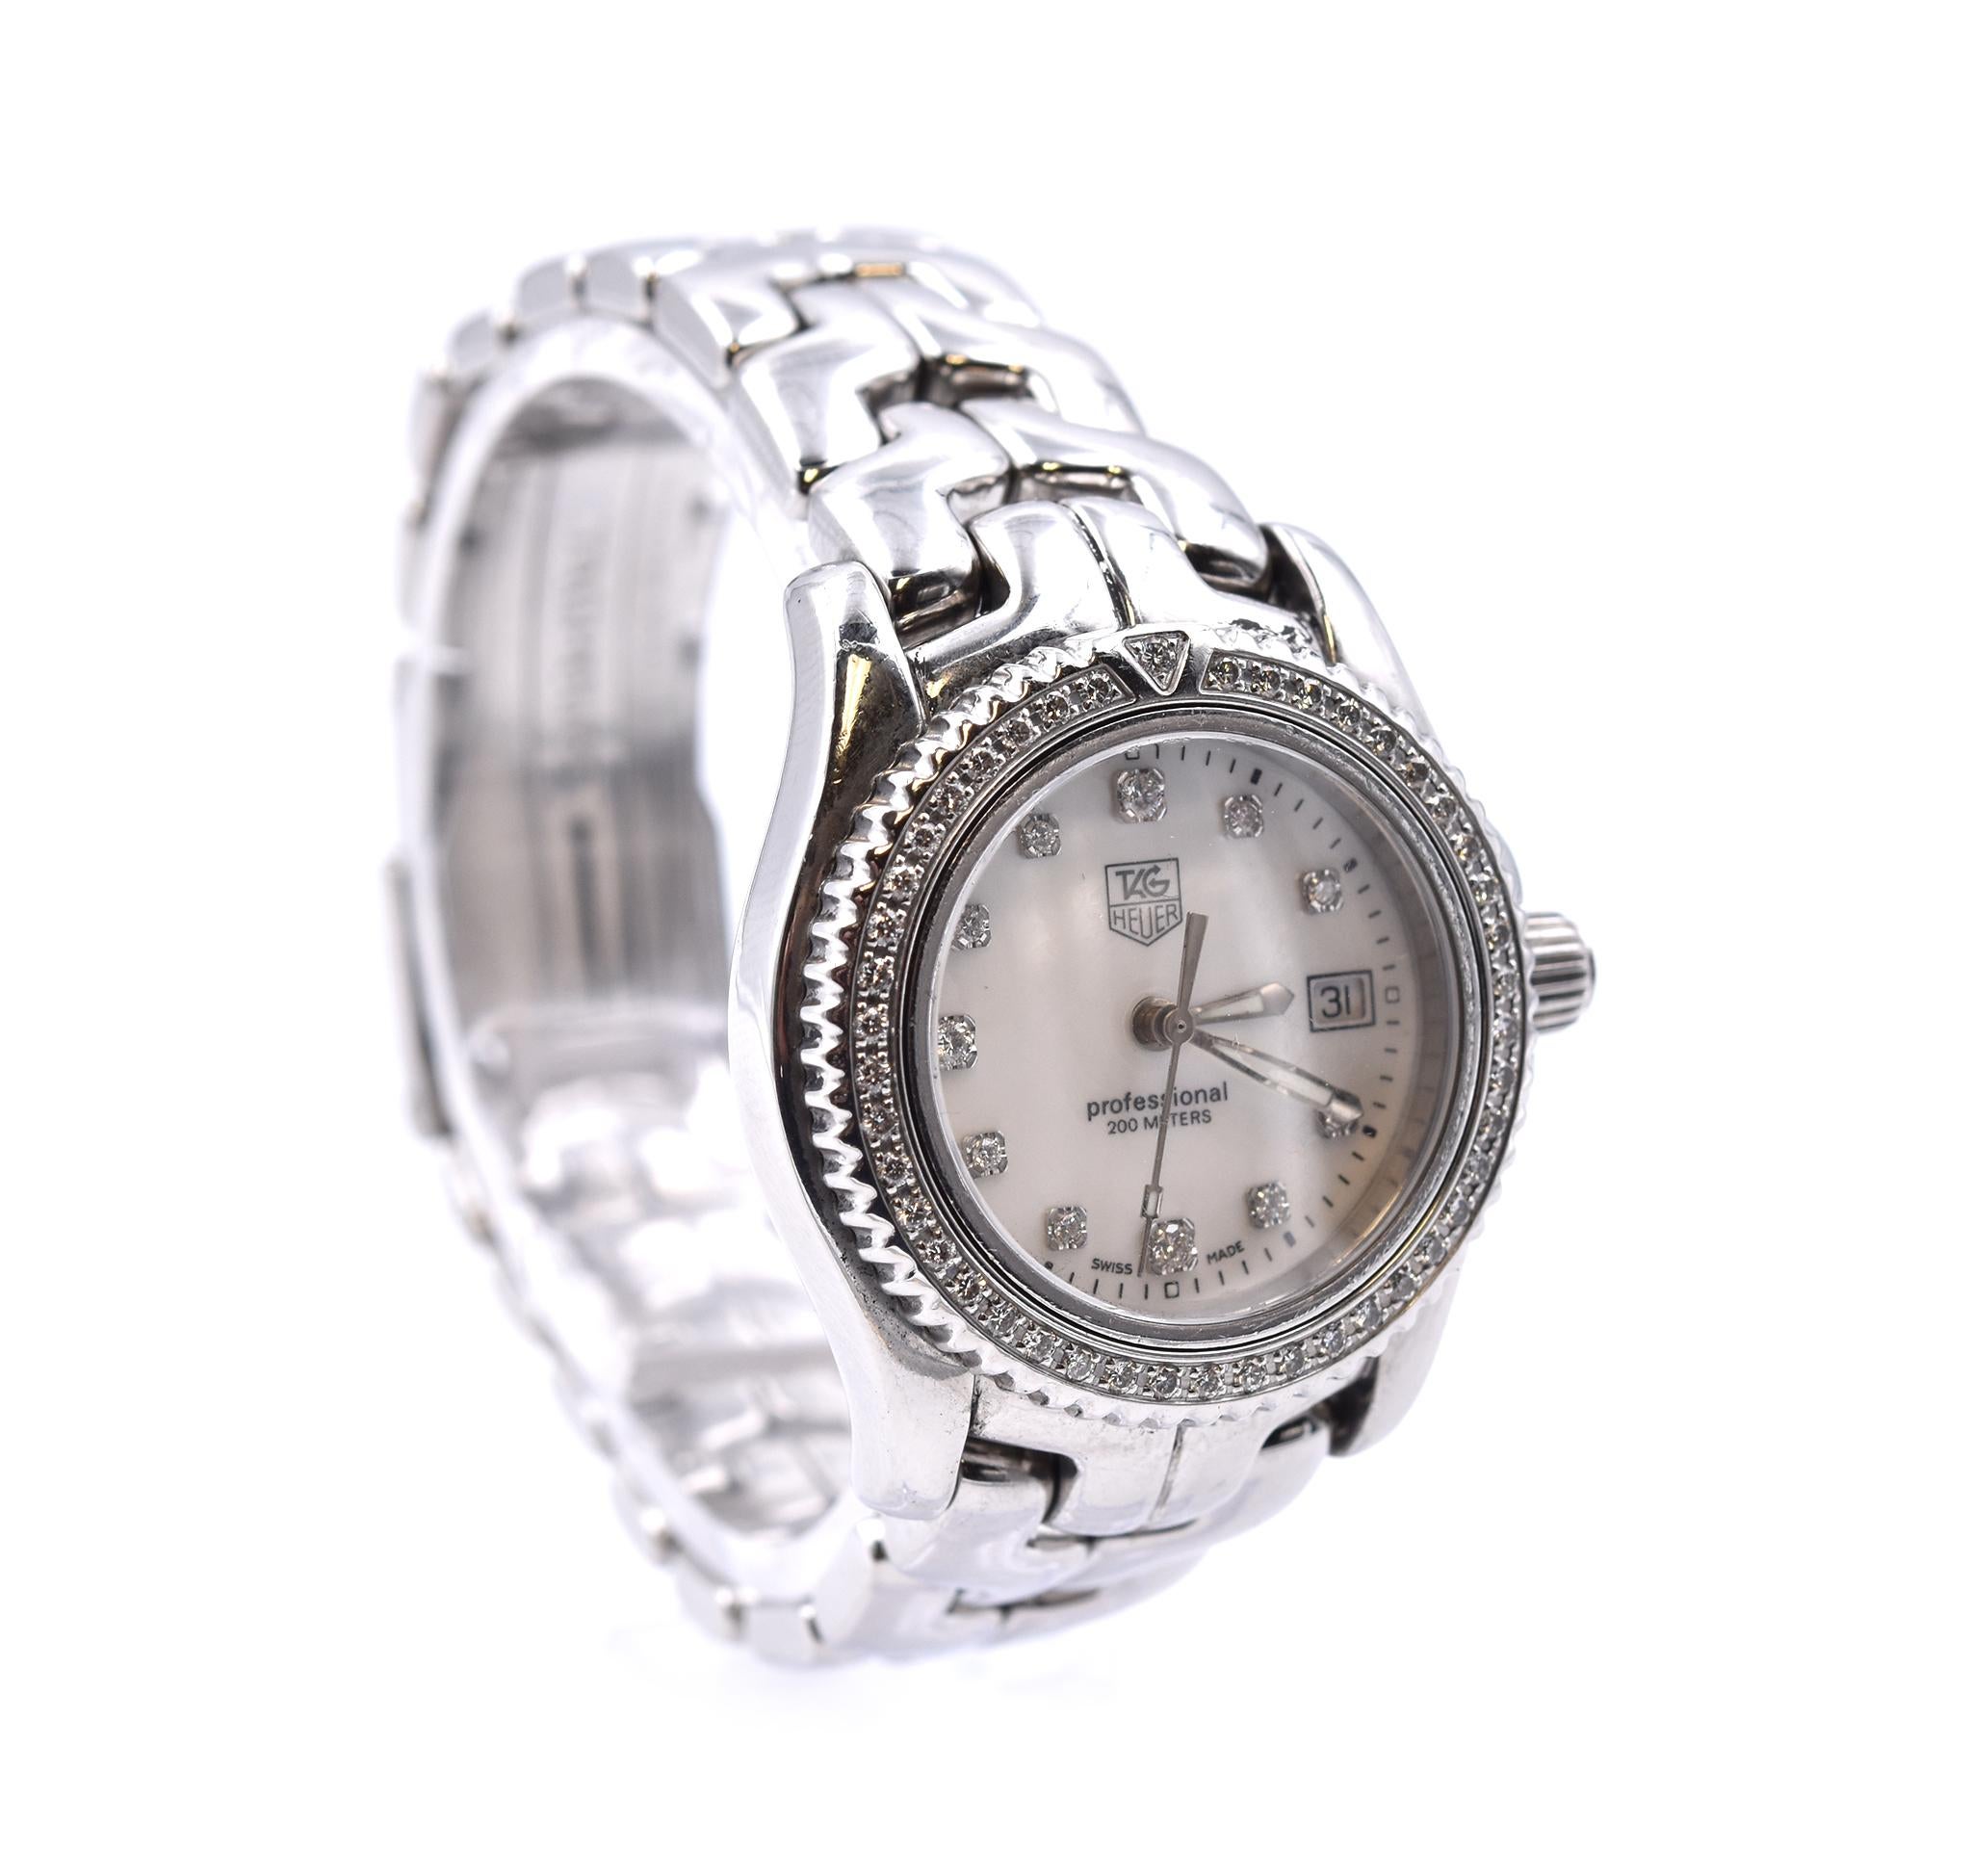 Movement: quartz
Function: hours, minuets, seconds, date
Case: 30mm stainless steel case, sapphire crystal, push/pull crown, diamond bezel
Dial: mother of pearl diamond dial
Band: stainless steel bracelet
Serial#: HQ5XXX
Reference#: WT1318

No box